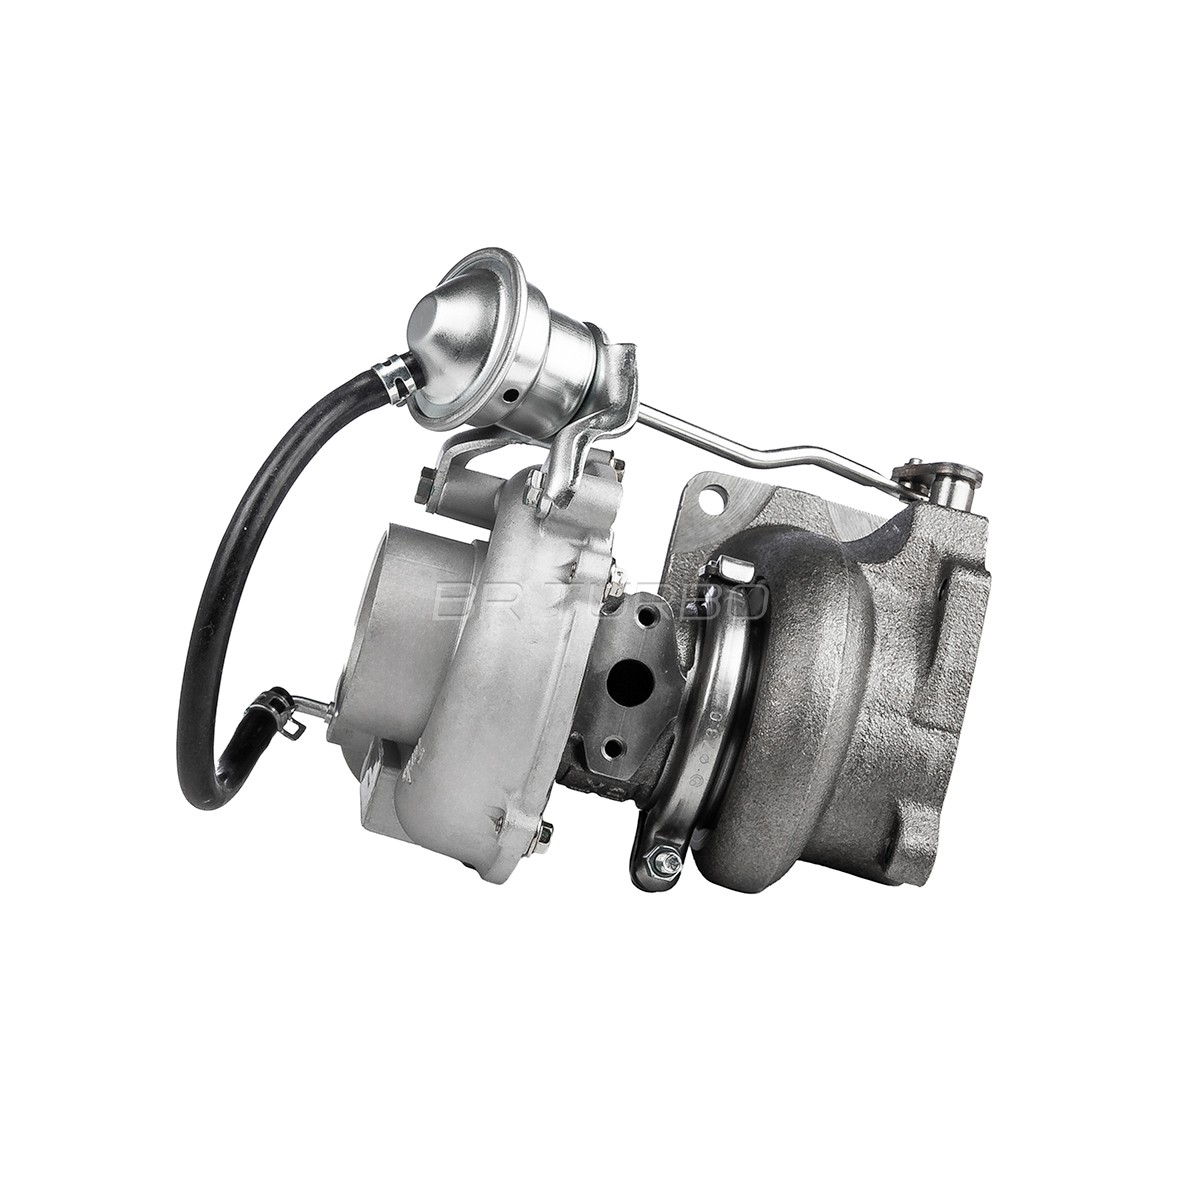 BRTX7914M Turbocharger NEW BR TURBO TURBOCHARGER WITH MOUNTING KIT BR Turbo BRTX7914M review and test